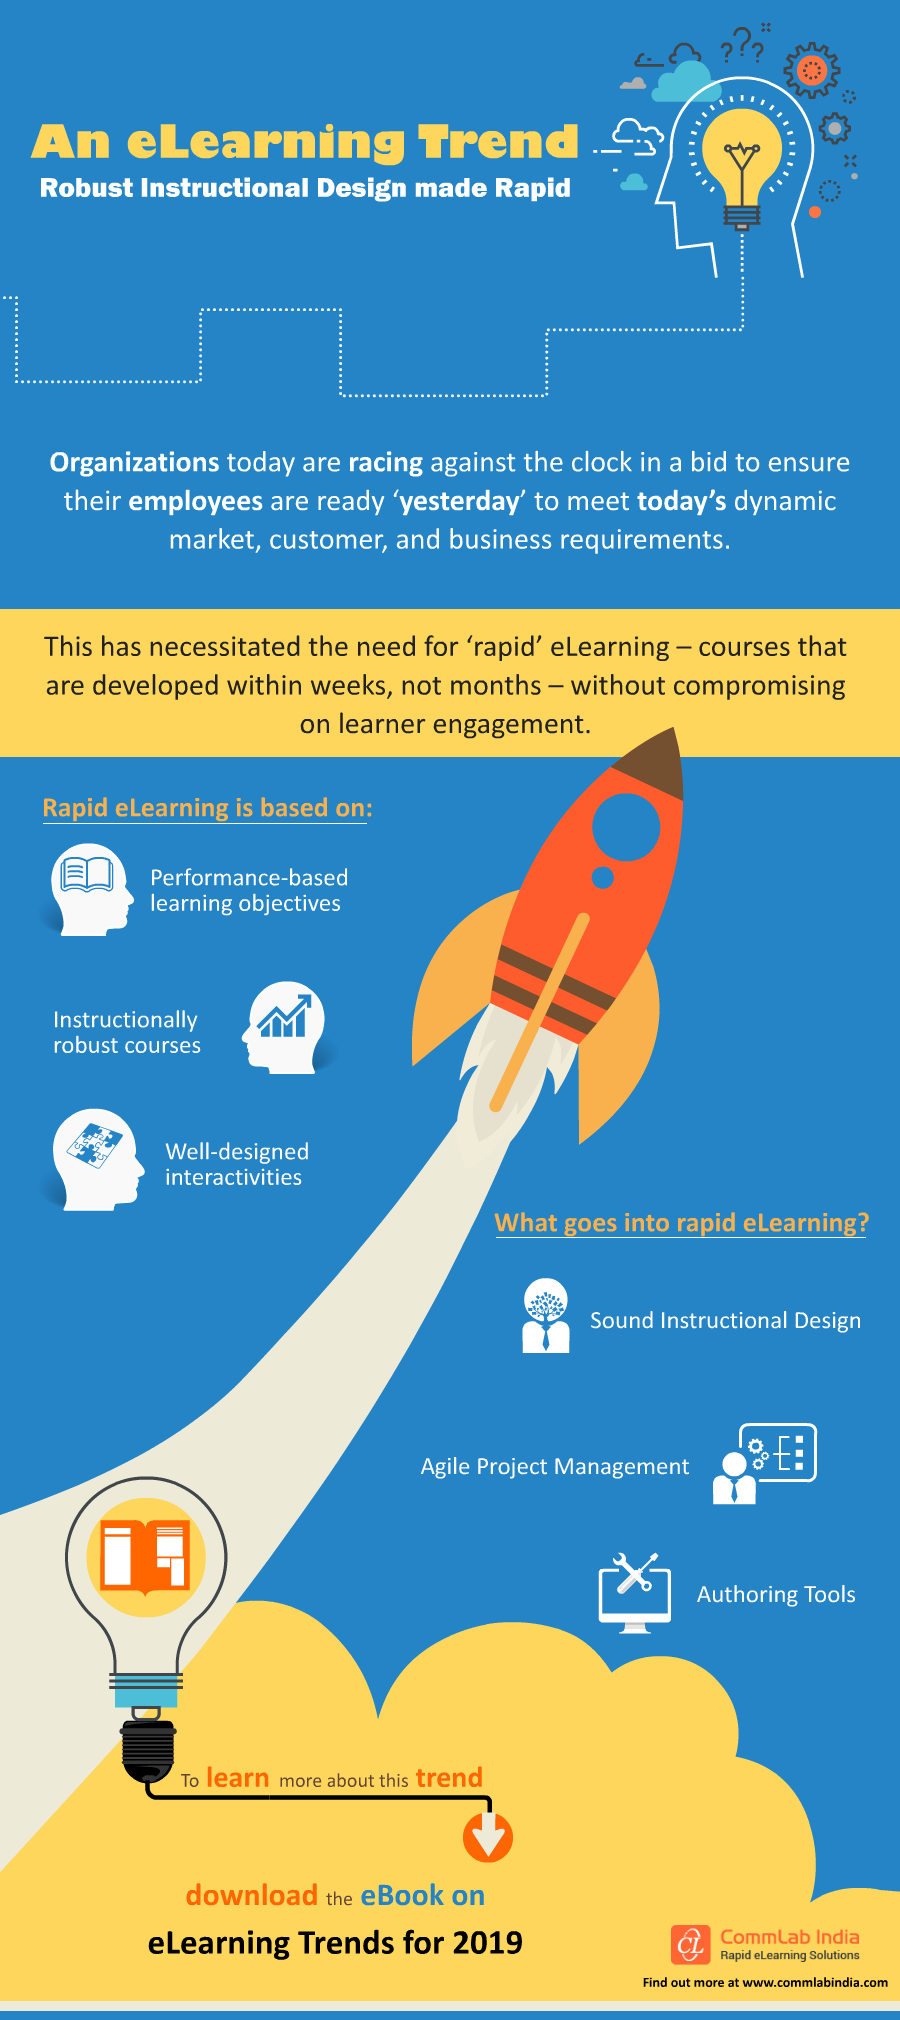 An E-Learning Trend: Robust Instructional Design made Rapid [Infographic]